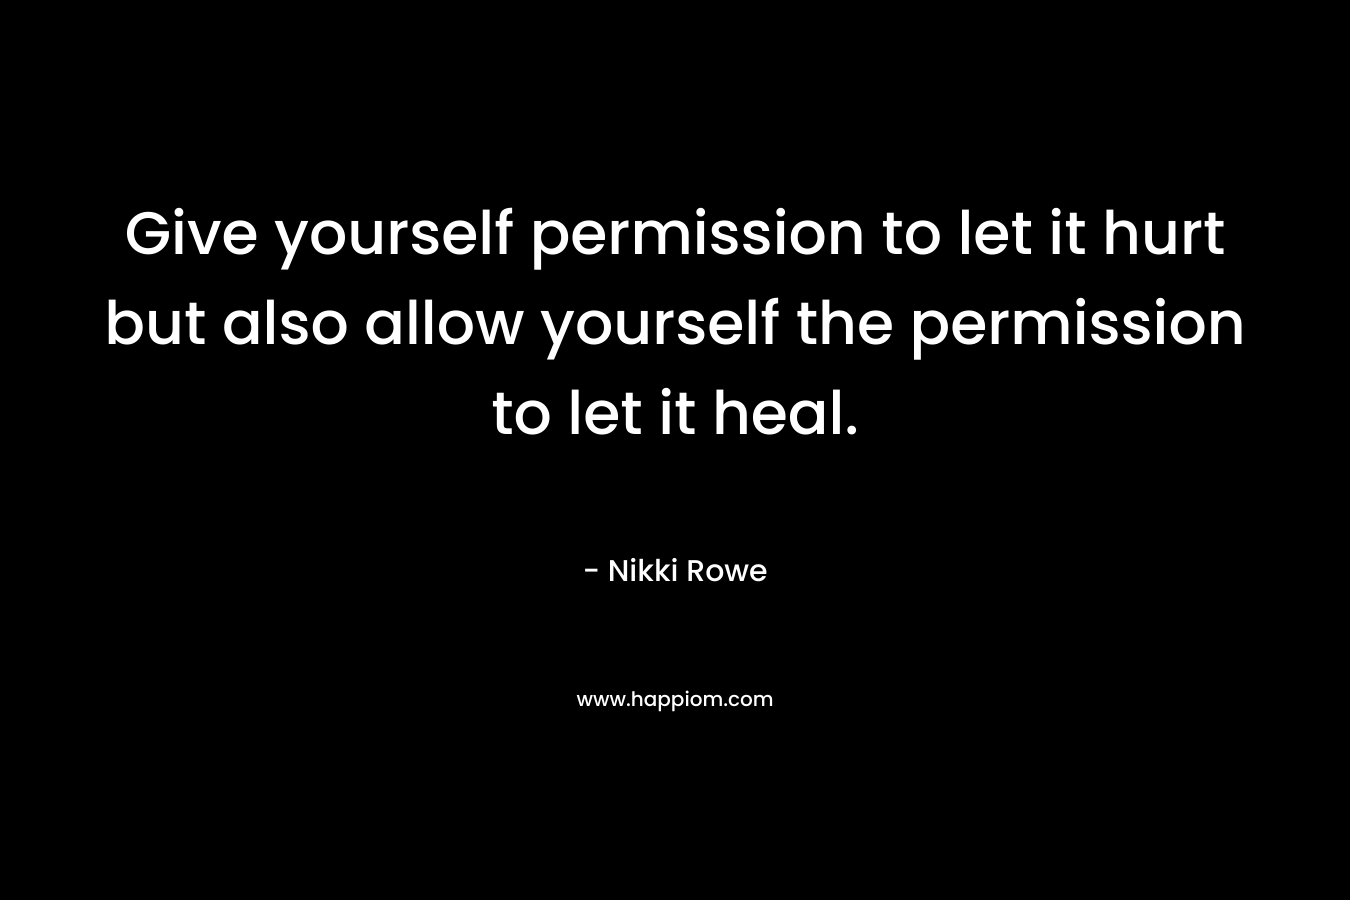 Give yourself permission to let it hurt but also allow yourself the permission to let it heal.